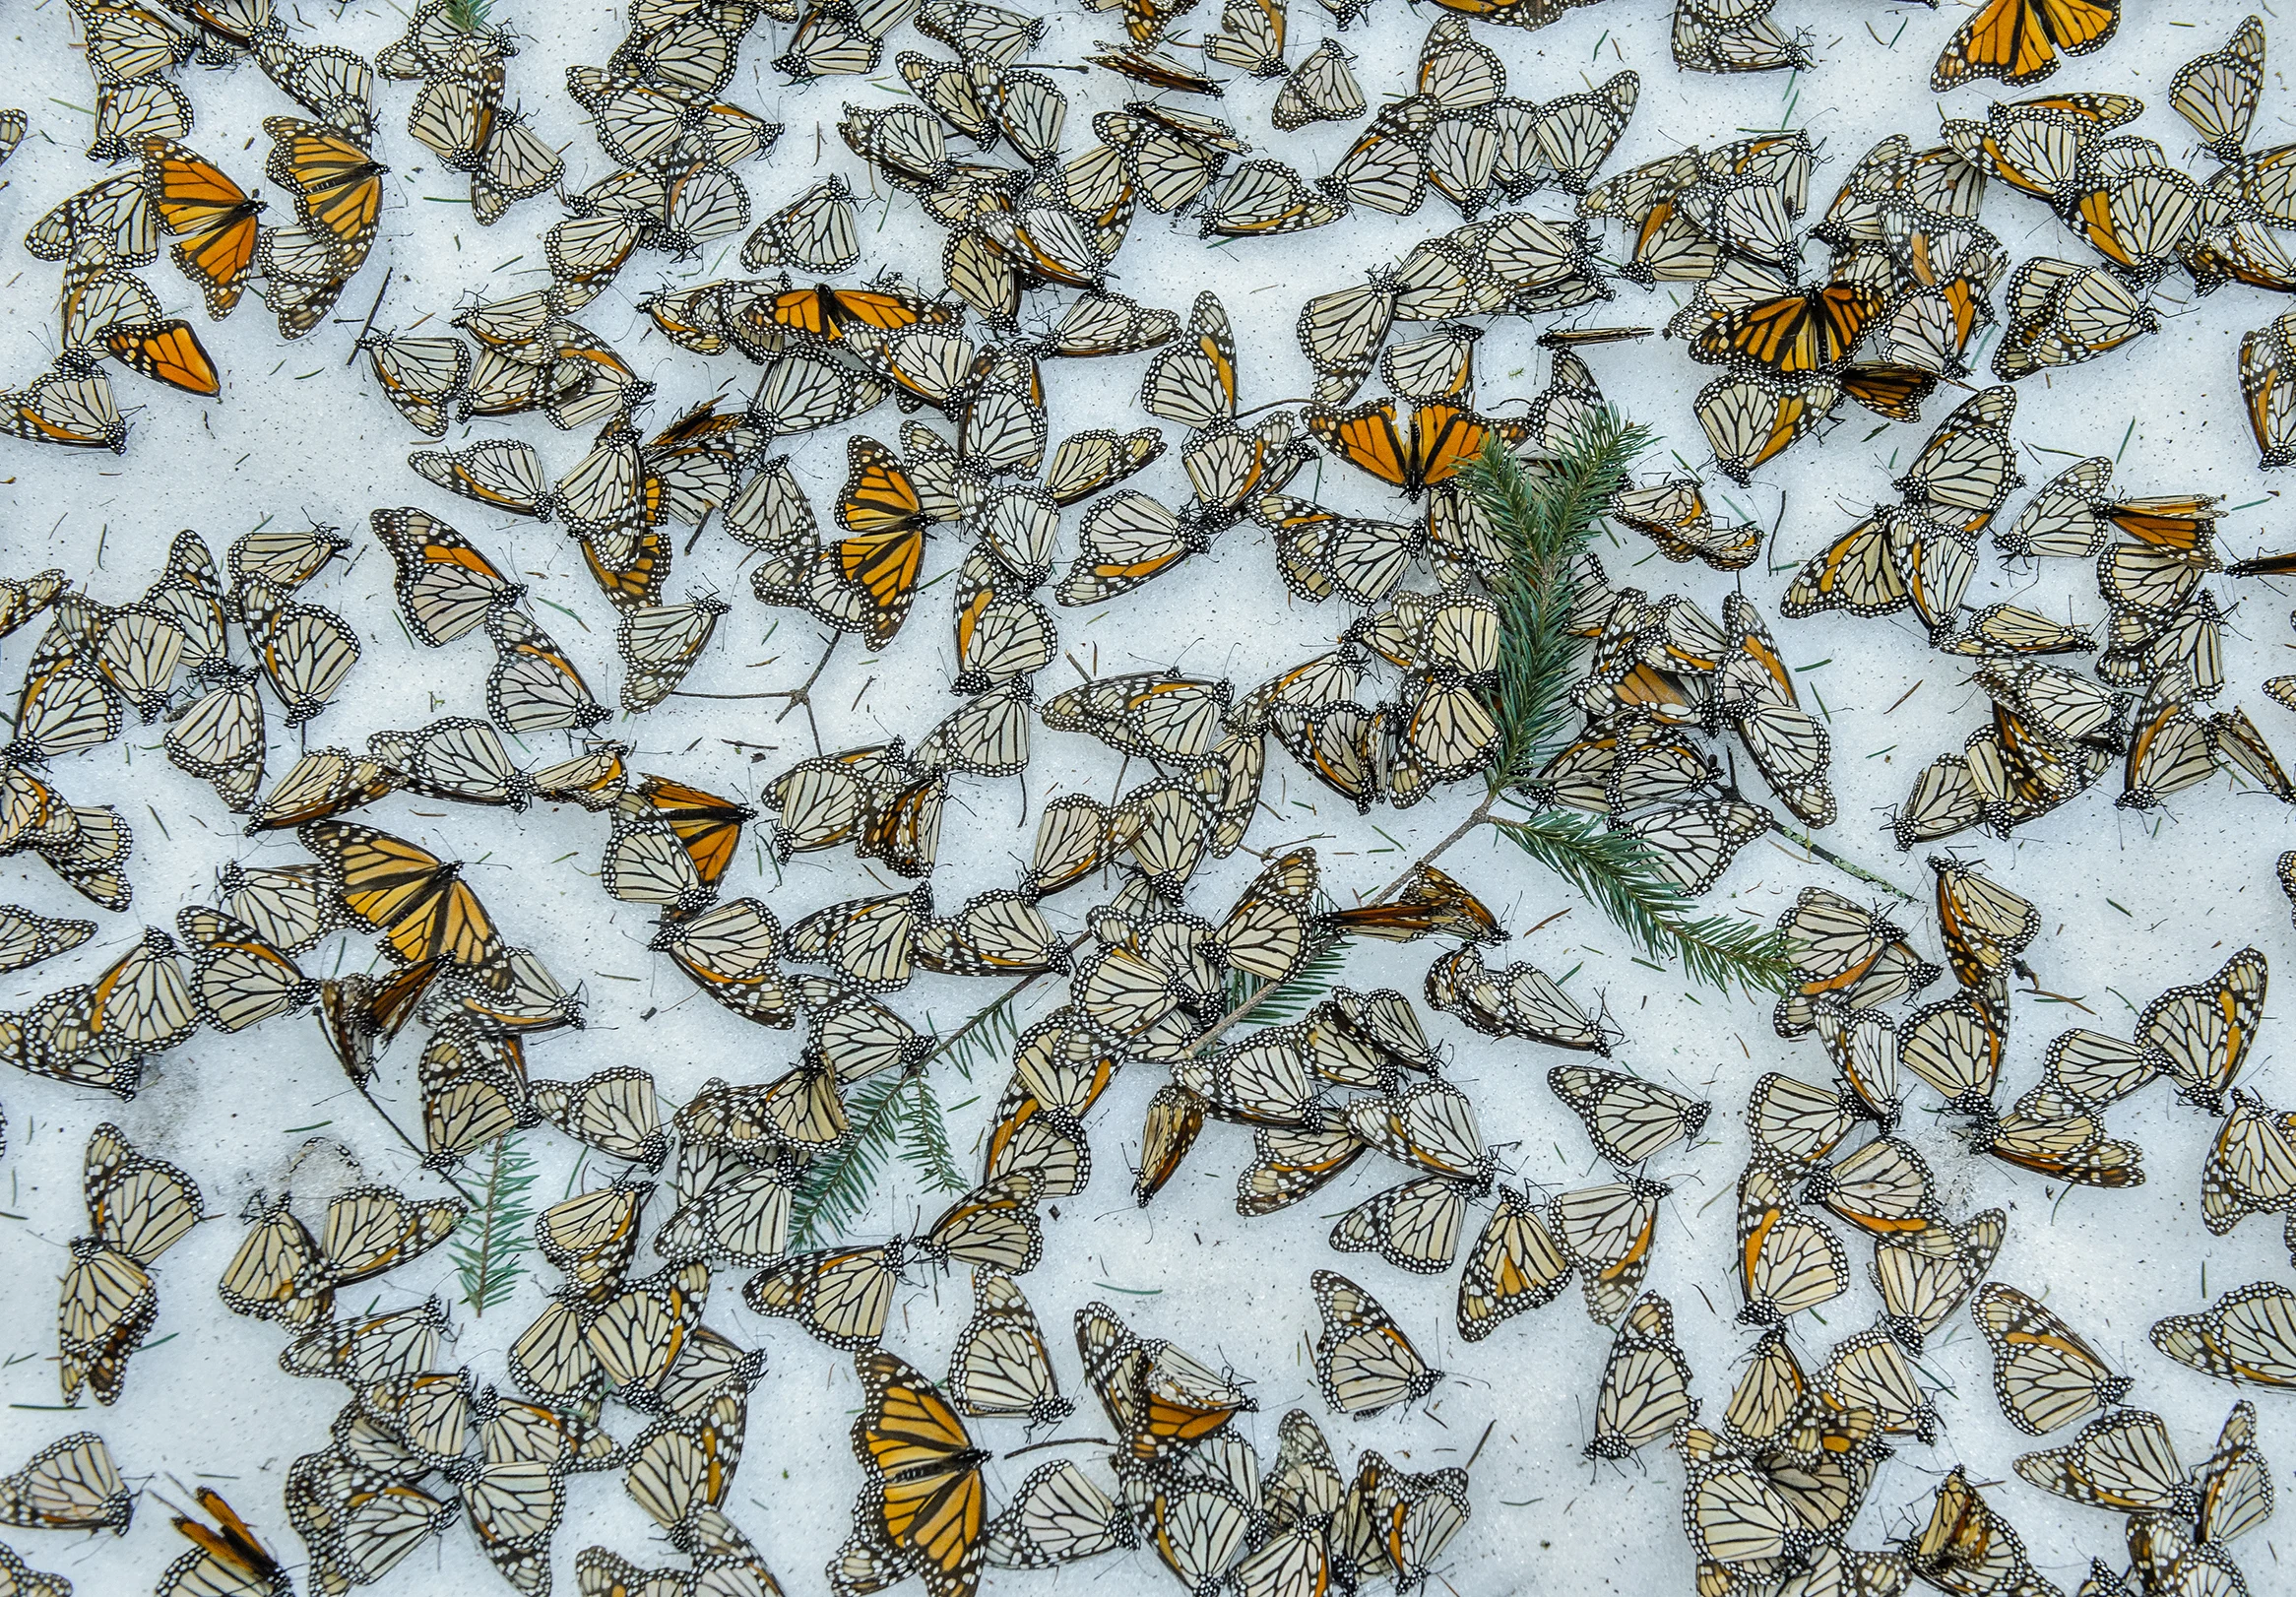 A carpet of Monarch Butterflies covers the forest floor of El Rosario Butterfly Sanctuary after a snow storm that hit the state of Michoacán in Mexico on March 2015.  On March 8th and 9th of 2016 a strong snow storm hit the mountains of Central Mexico creating havoc in the wintering colonies of Monarch Butterflies just when they were starting their migration back to U.S.A. and Canada. Monarch butterflies are surprisingly resilient and they can survive several days in below zero temperatures as long as they remain dry. Deforestation reduces the shelter for the butterflies making them more vulnerable to the weather elements. And although illegal logging has been curbed thanks to the conservation efforts in Mexico, climate change is creating an increase of these unusual weather events which represent one of the biggest challenges for these insects during their hibernation period.